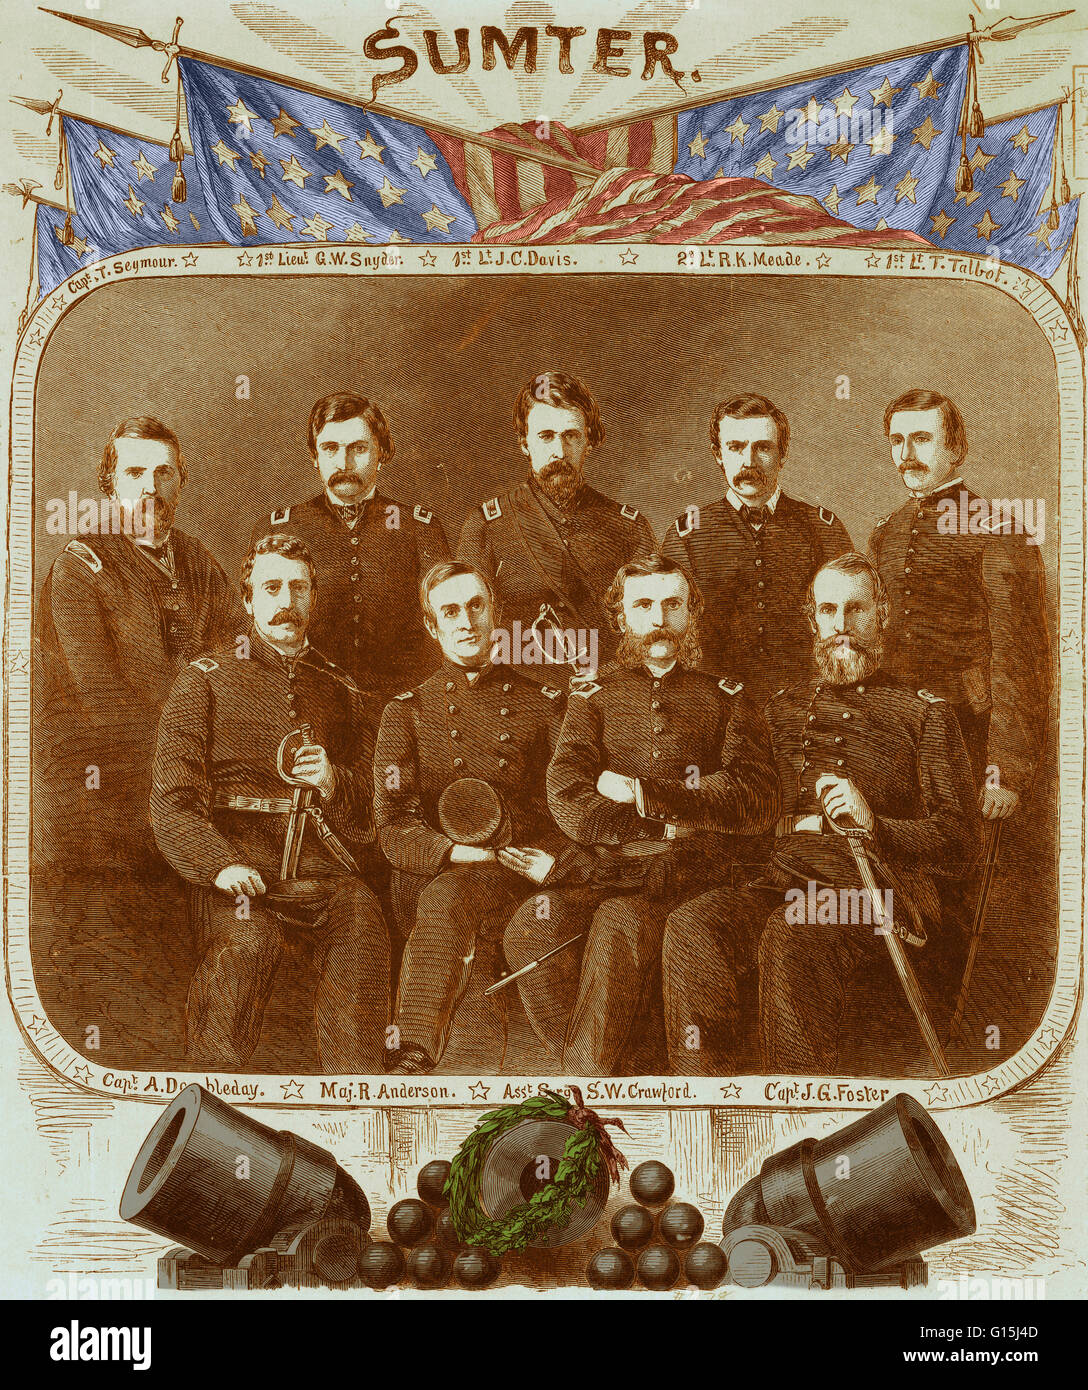 Color enhanced illustration of the officers of the Union garrison at Fort Sumter. On April 13, Major Anderson surrendered Fort Sumter, evacuating the garrison on the following day. The bombardment of Fort Sumter was the opening engagement of the American Stock Photo